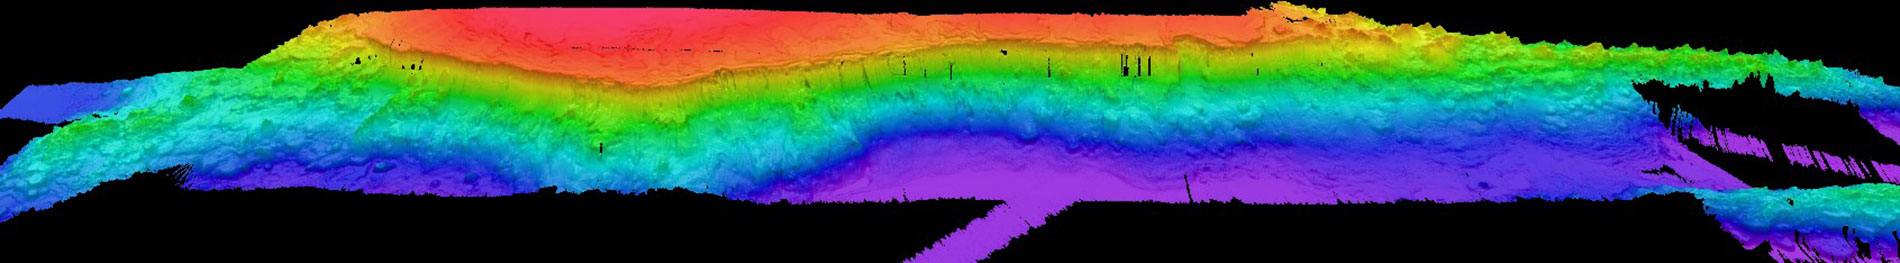 A 245 km long section of Horizon Tablemount mapped during strategic Transits of four cruises. Image courtesy of the NOAA Office of Ocean Exploration and Research.